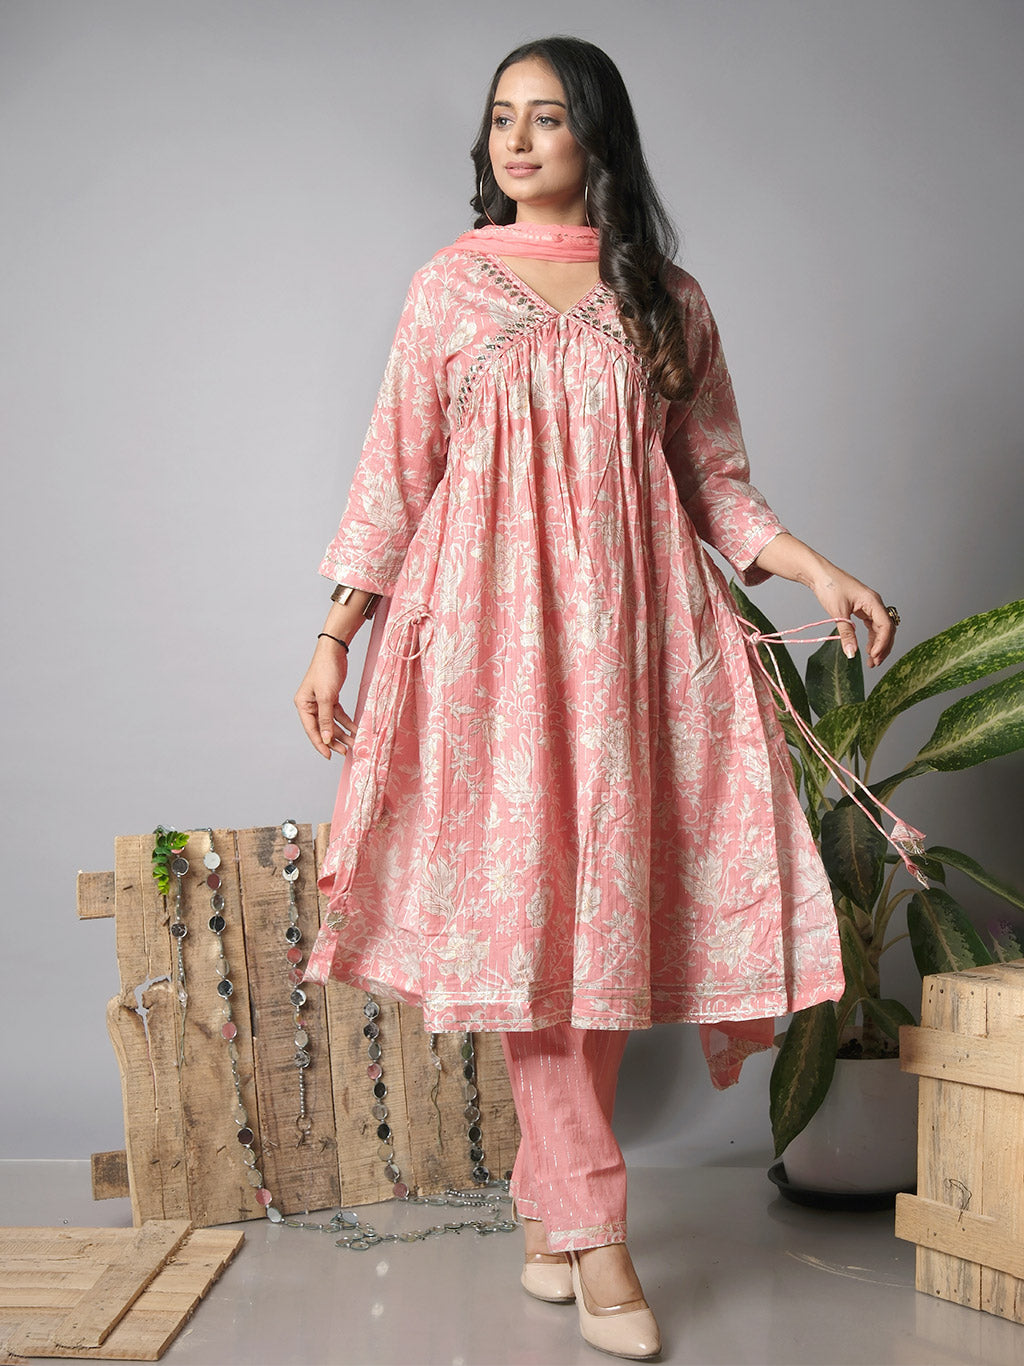 Pink Floral kurta set with dupatta, another front view